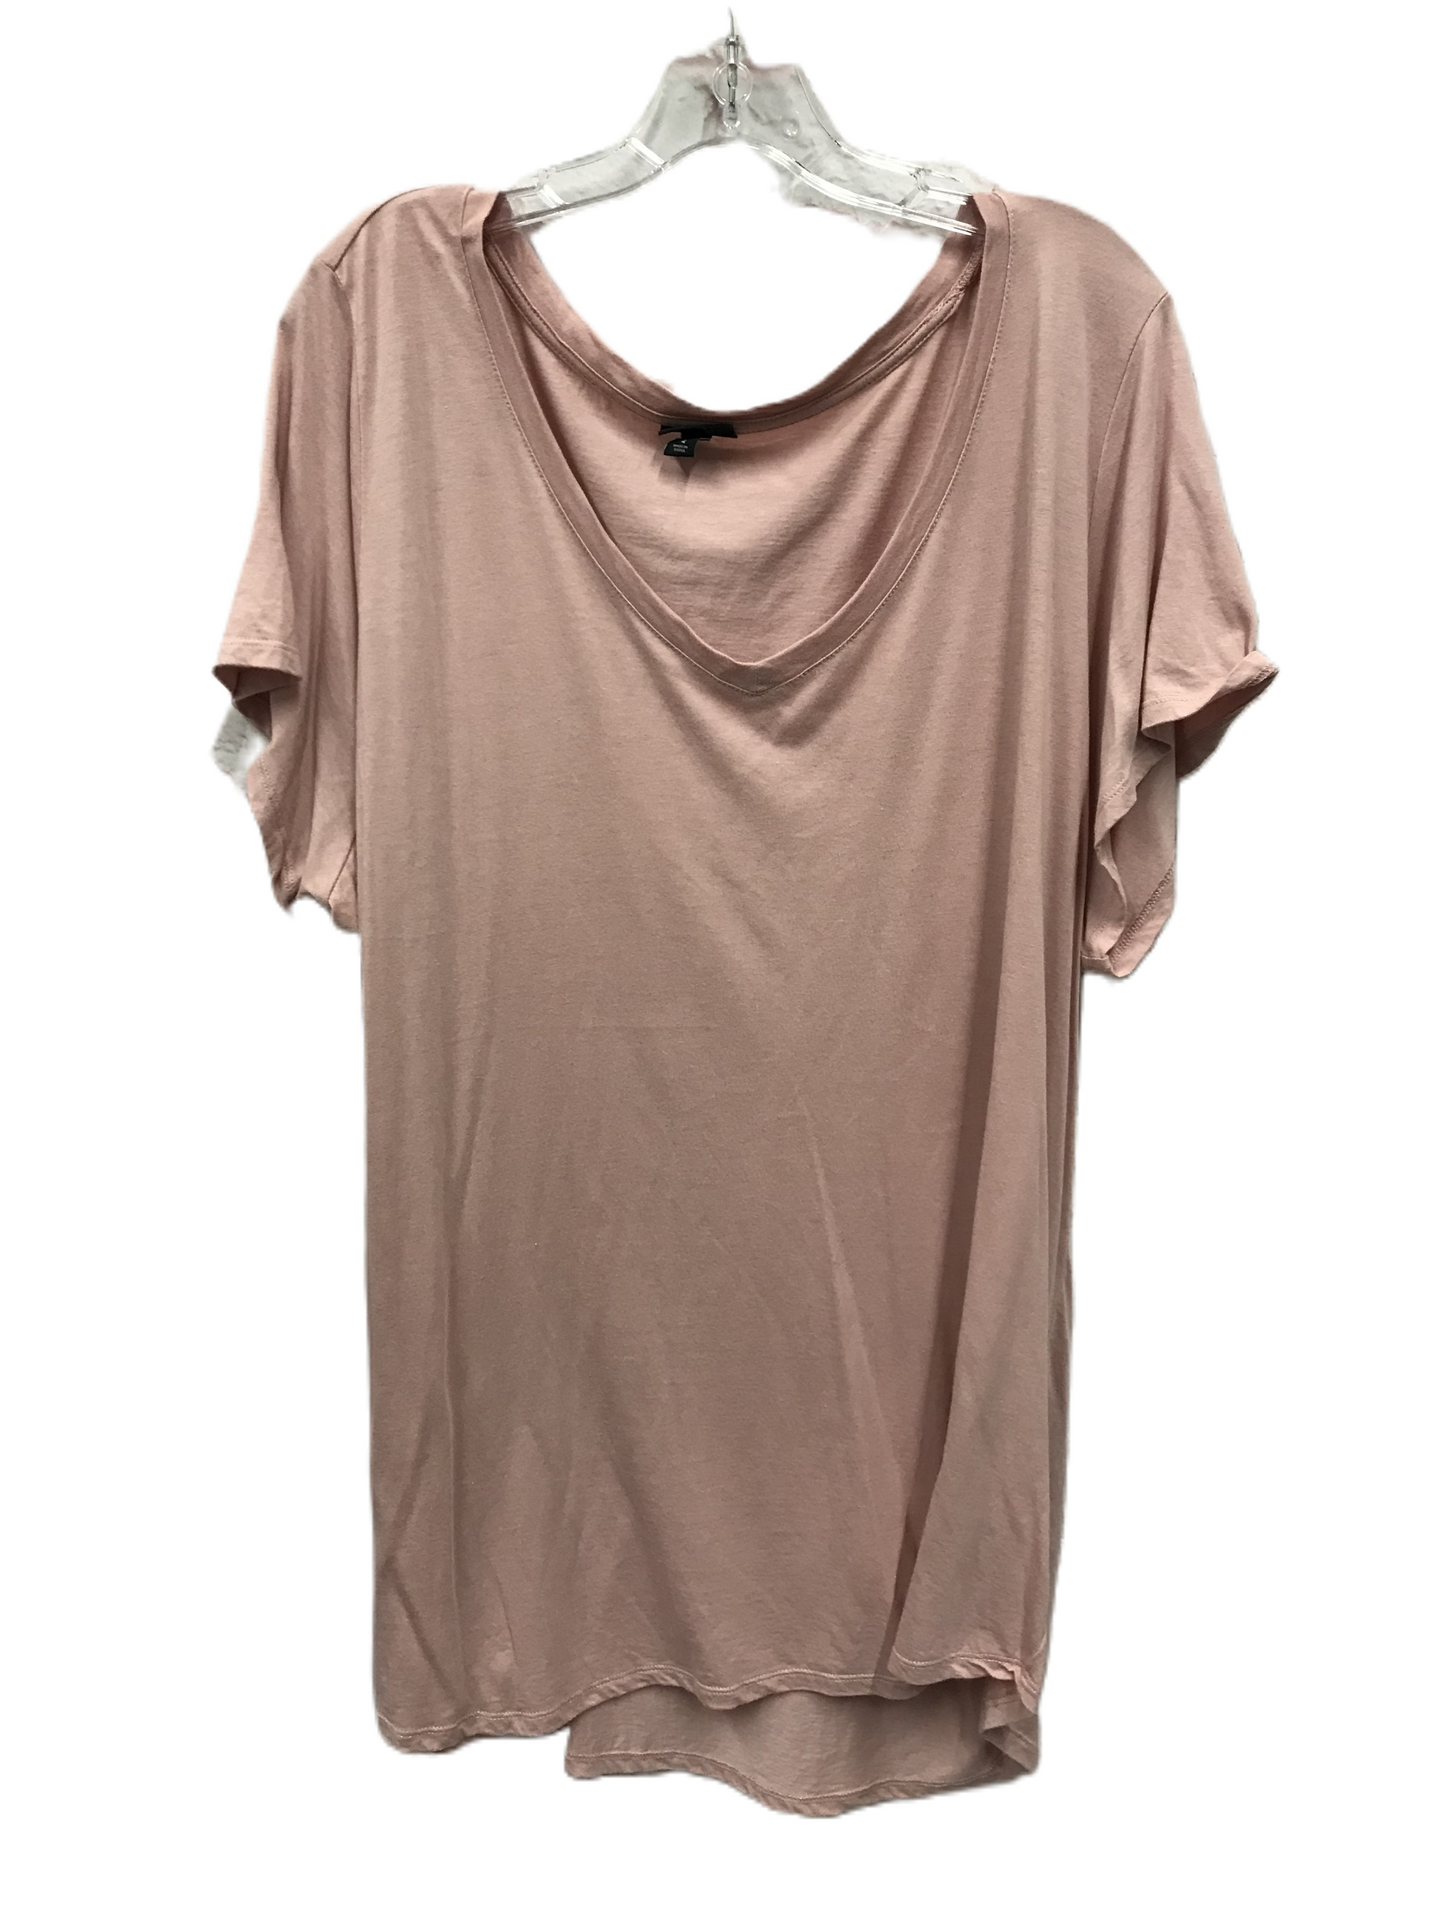 Pink Top Short Sleeve Basic By Torrid, Size: 4x